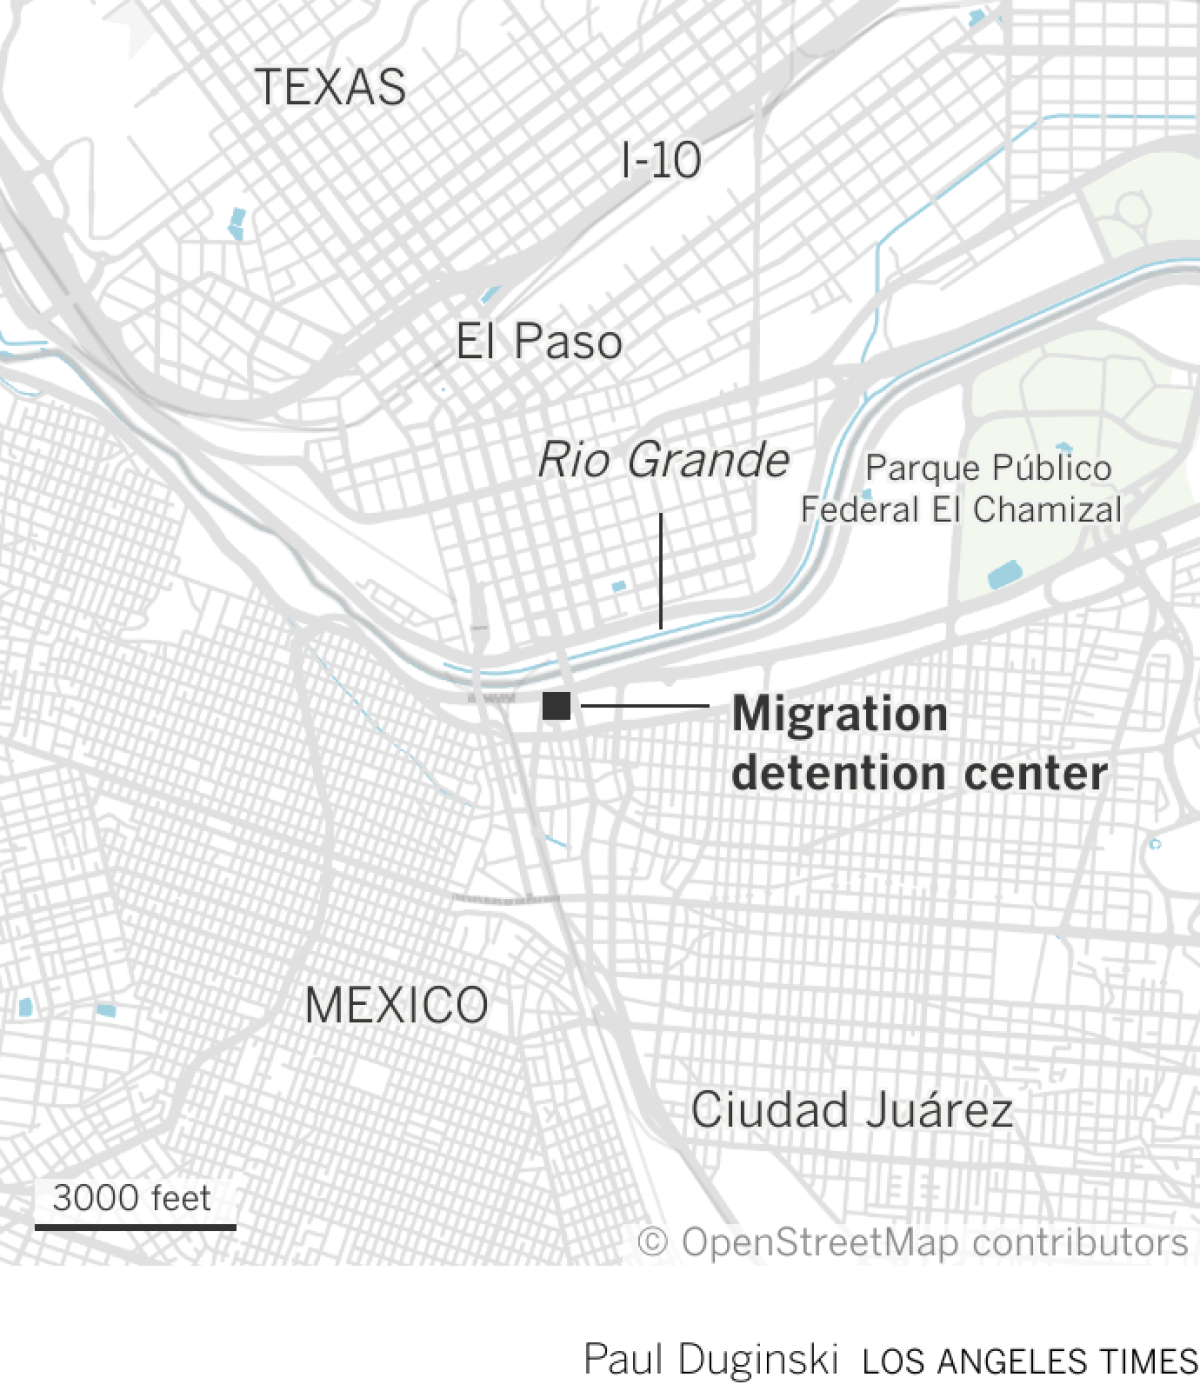 Location of migration detention center in Ciudad Juárez where fire killed at least 39.